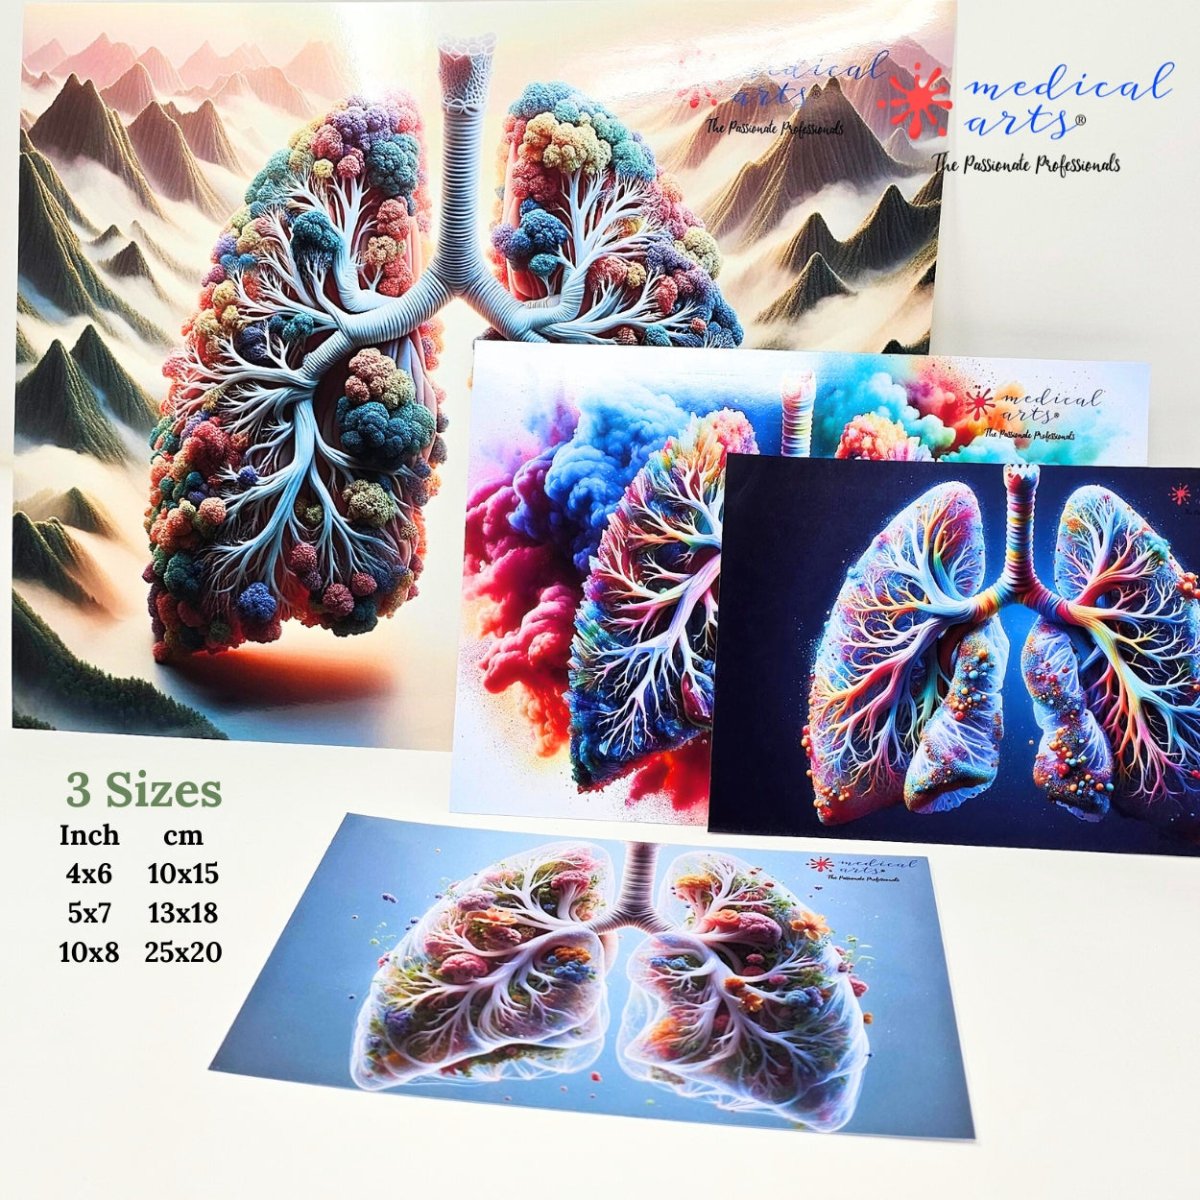 Lungs || Artistic Fine Art ||  Personalized || Medical Arts Gallery